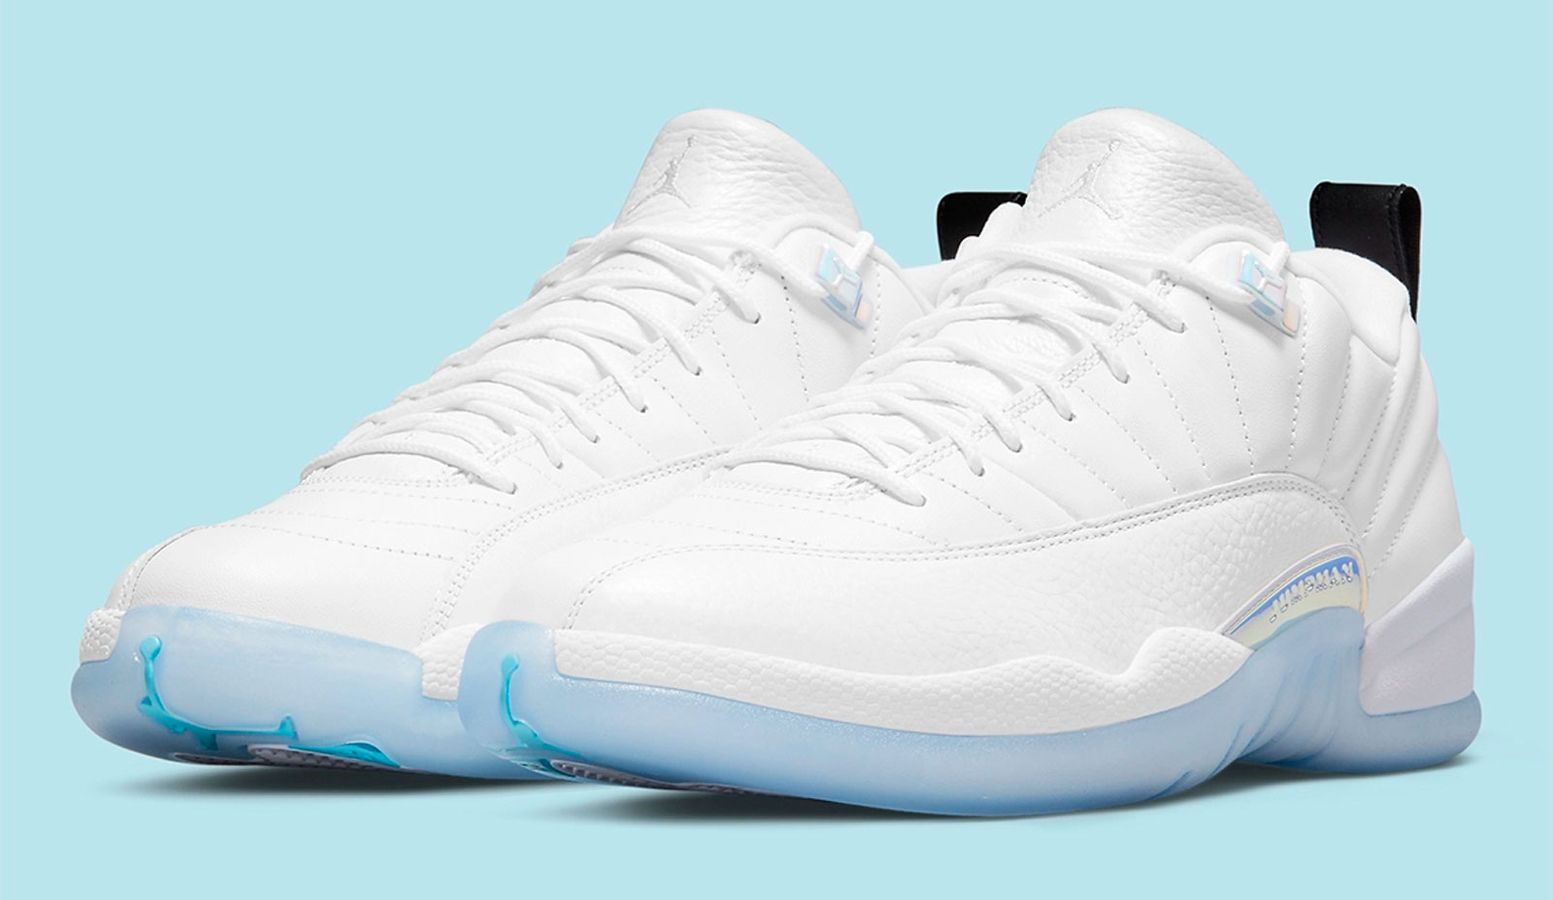 Best Air Jordan 12 colorways "Easter" product image of a pair of white low-top sneakers with icy blue outsoles.